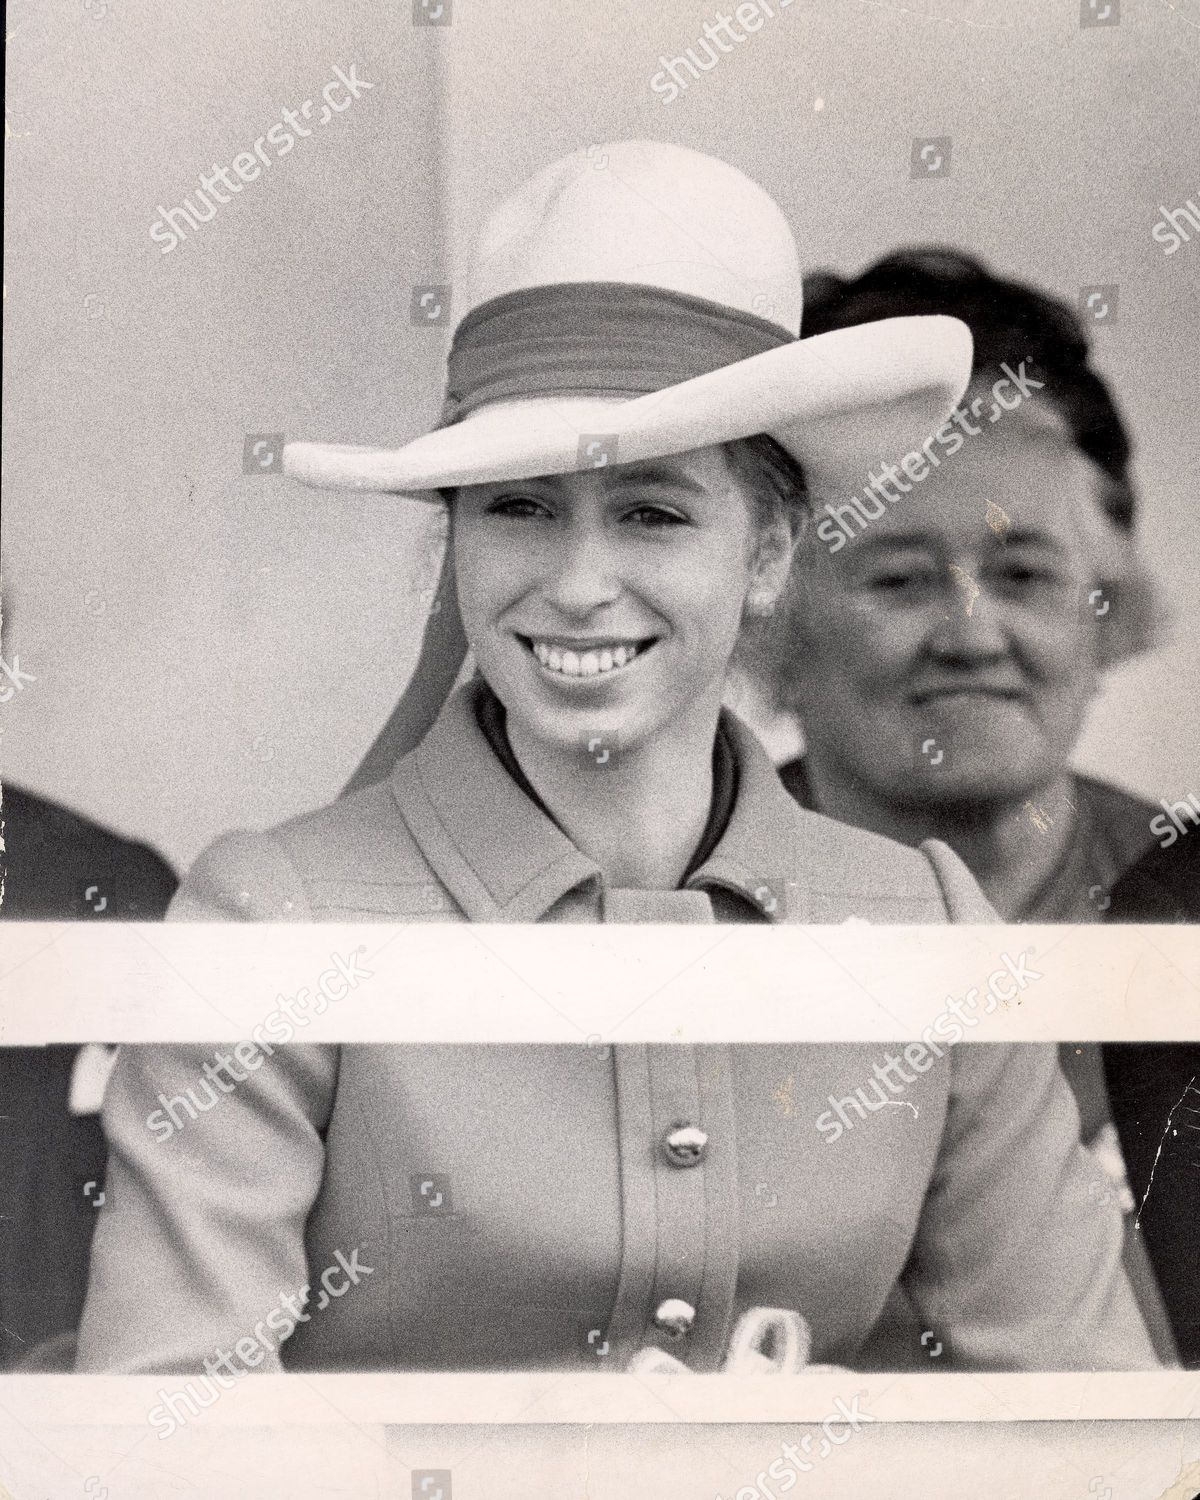 princess-anne-now-princess-royal-1969-picture-shows-princess-anne-wearing-a-wide-brimmed-hat-watching-the-festival-of-london-stores-parade-at-hyde-park-corner-shutterstock-editorial-890821a.jpg